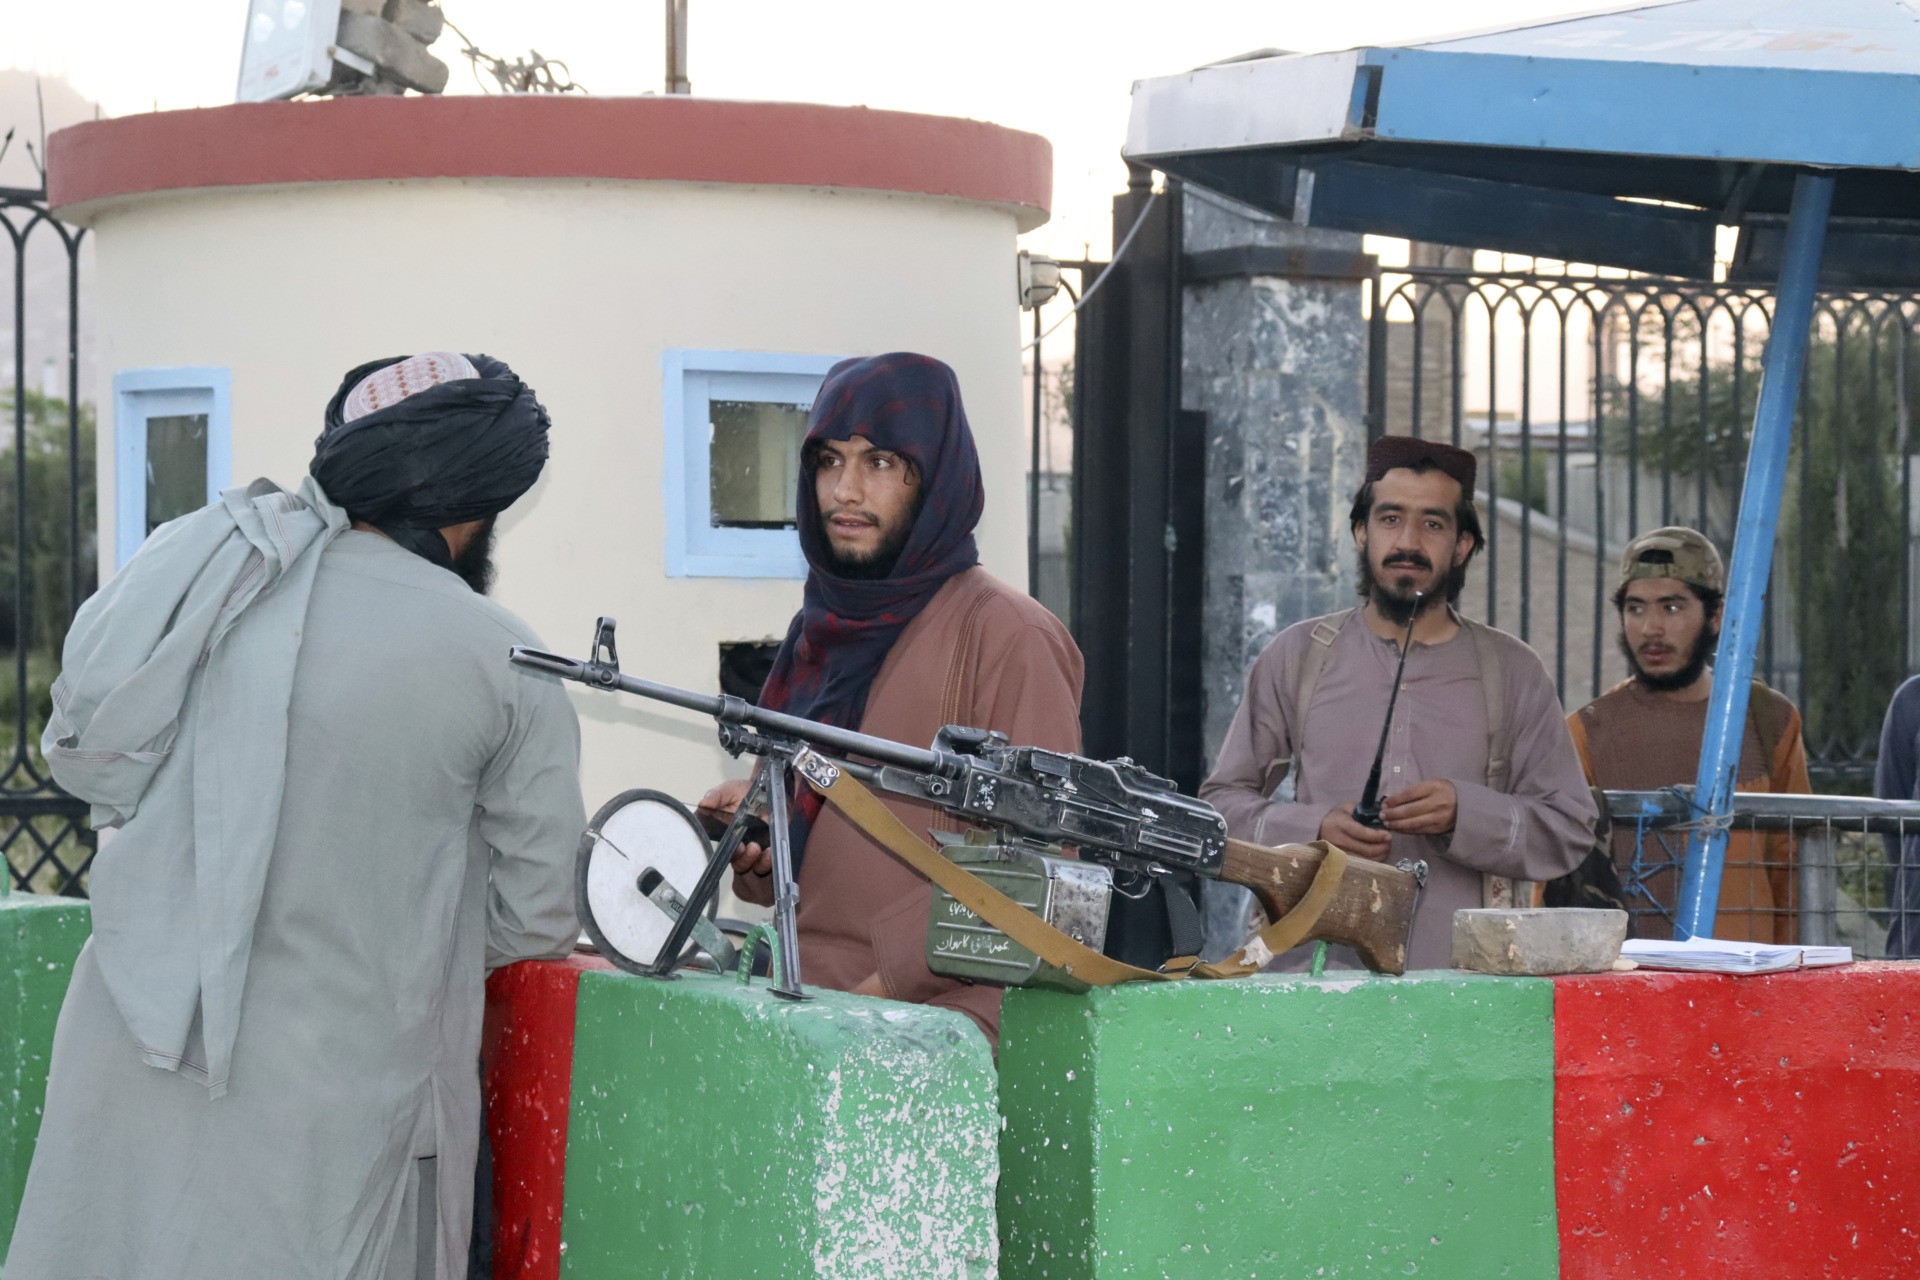 Taliban fighters stand guard at a checkpoint in Kabul, Afghanistan, Wednesday, Aug. 25, 2021. The Taliban wrested back control of Afghanistan nearly 20 years after they were ousted in a U.S.-led invasion following the 9/11 attacks. Their return to power has pushed many Afghans to flee, fearing reprisals from the fighters or a return to the brutal rule they imposed when they last ran the country. (AP Photo/Khwaja Tawfiq Sediqi)